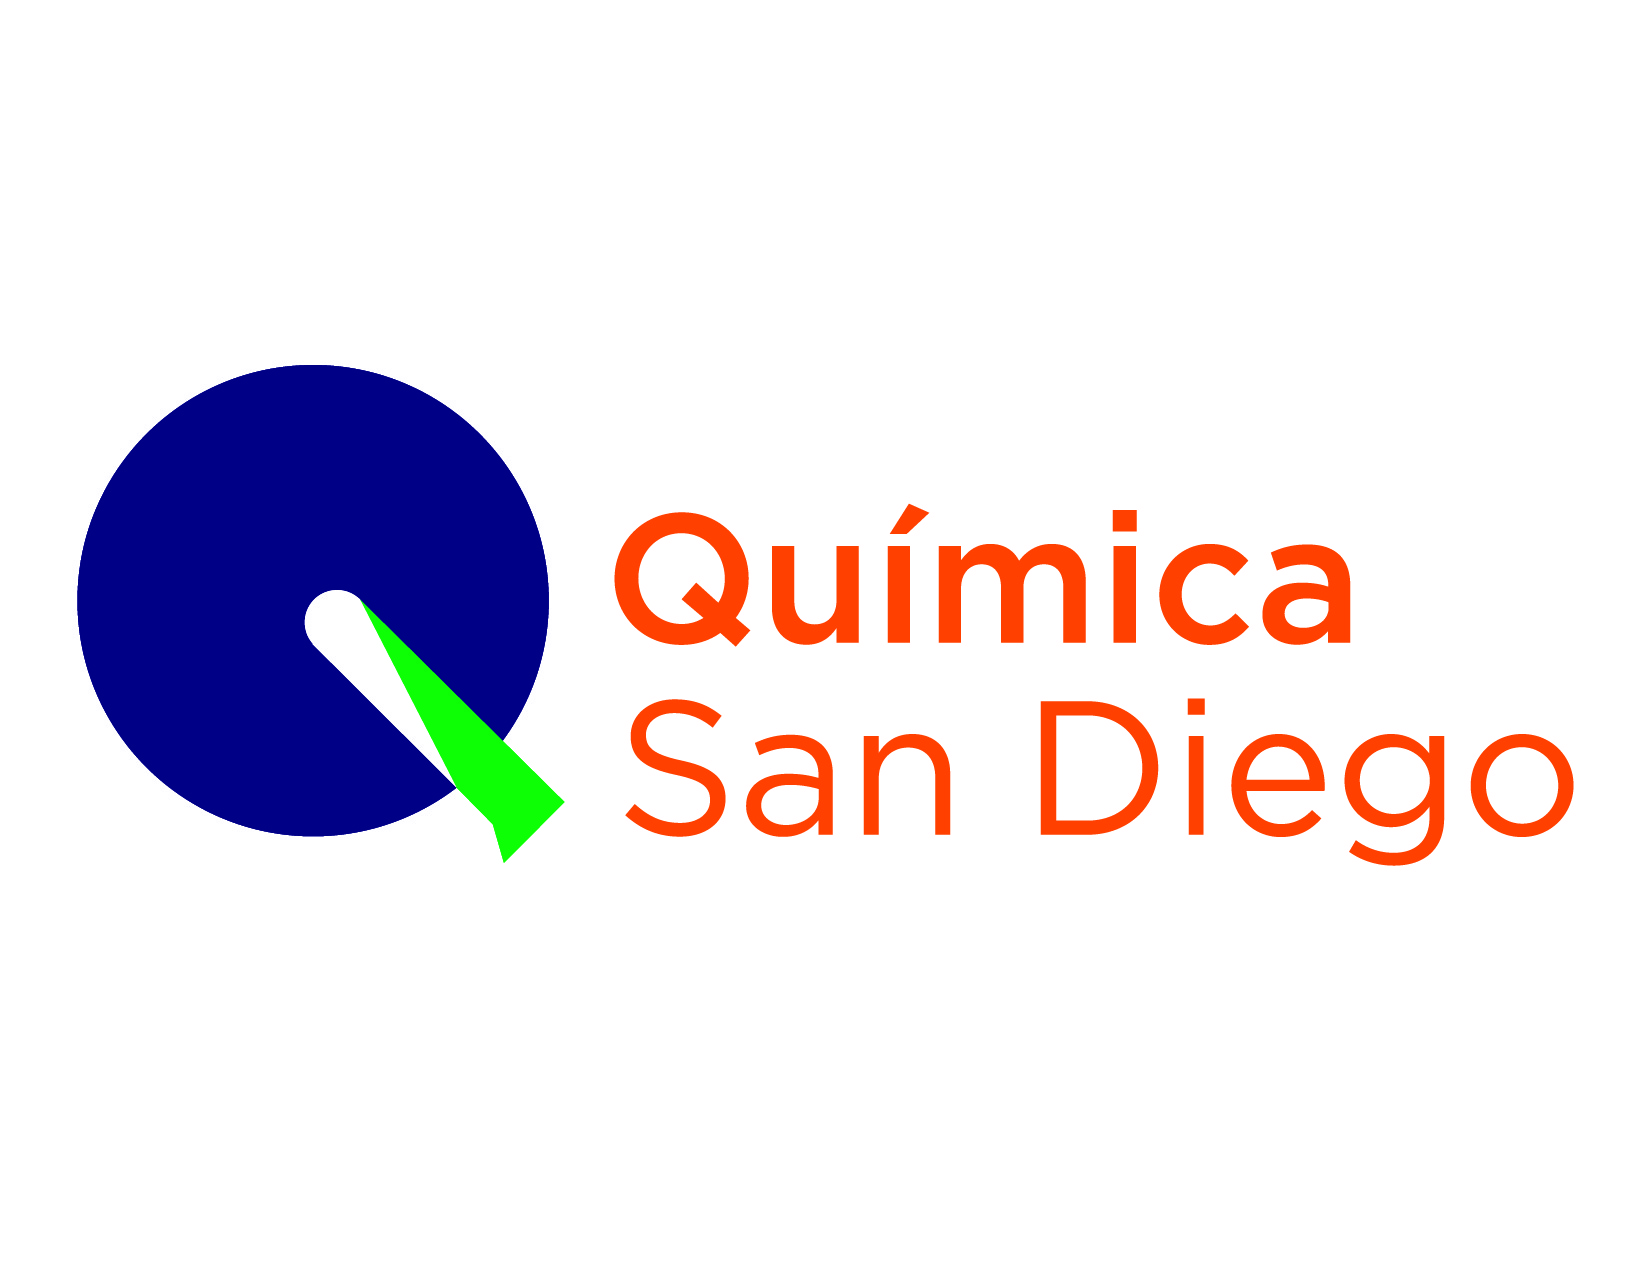 QUIMICA SAN DIEGO